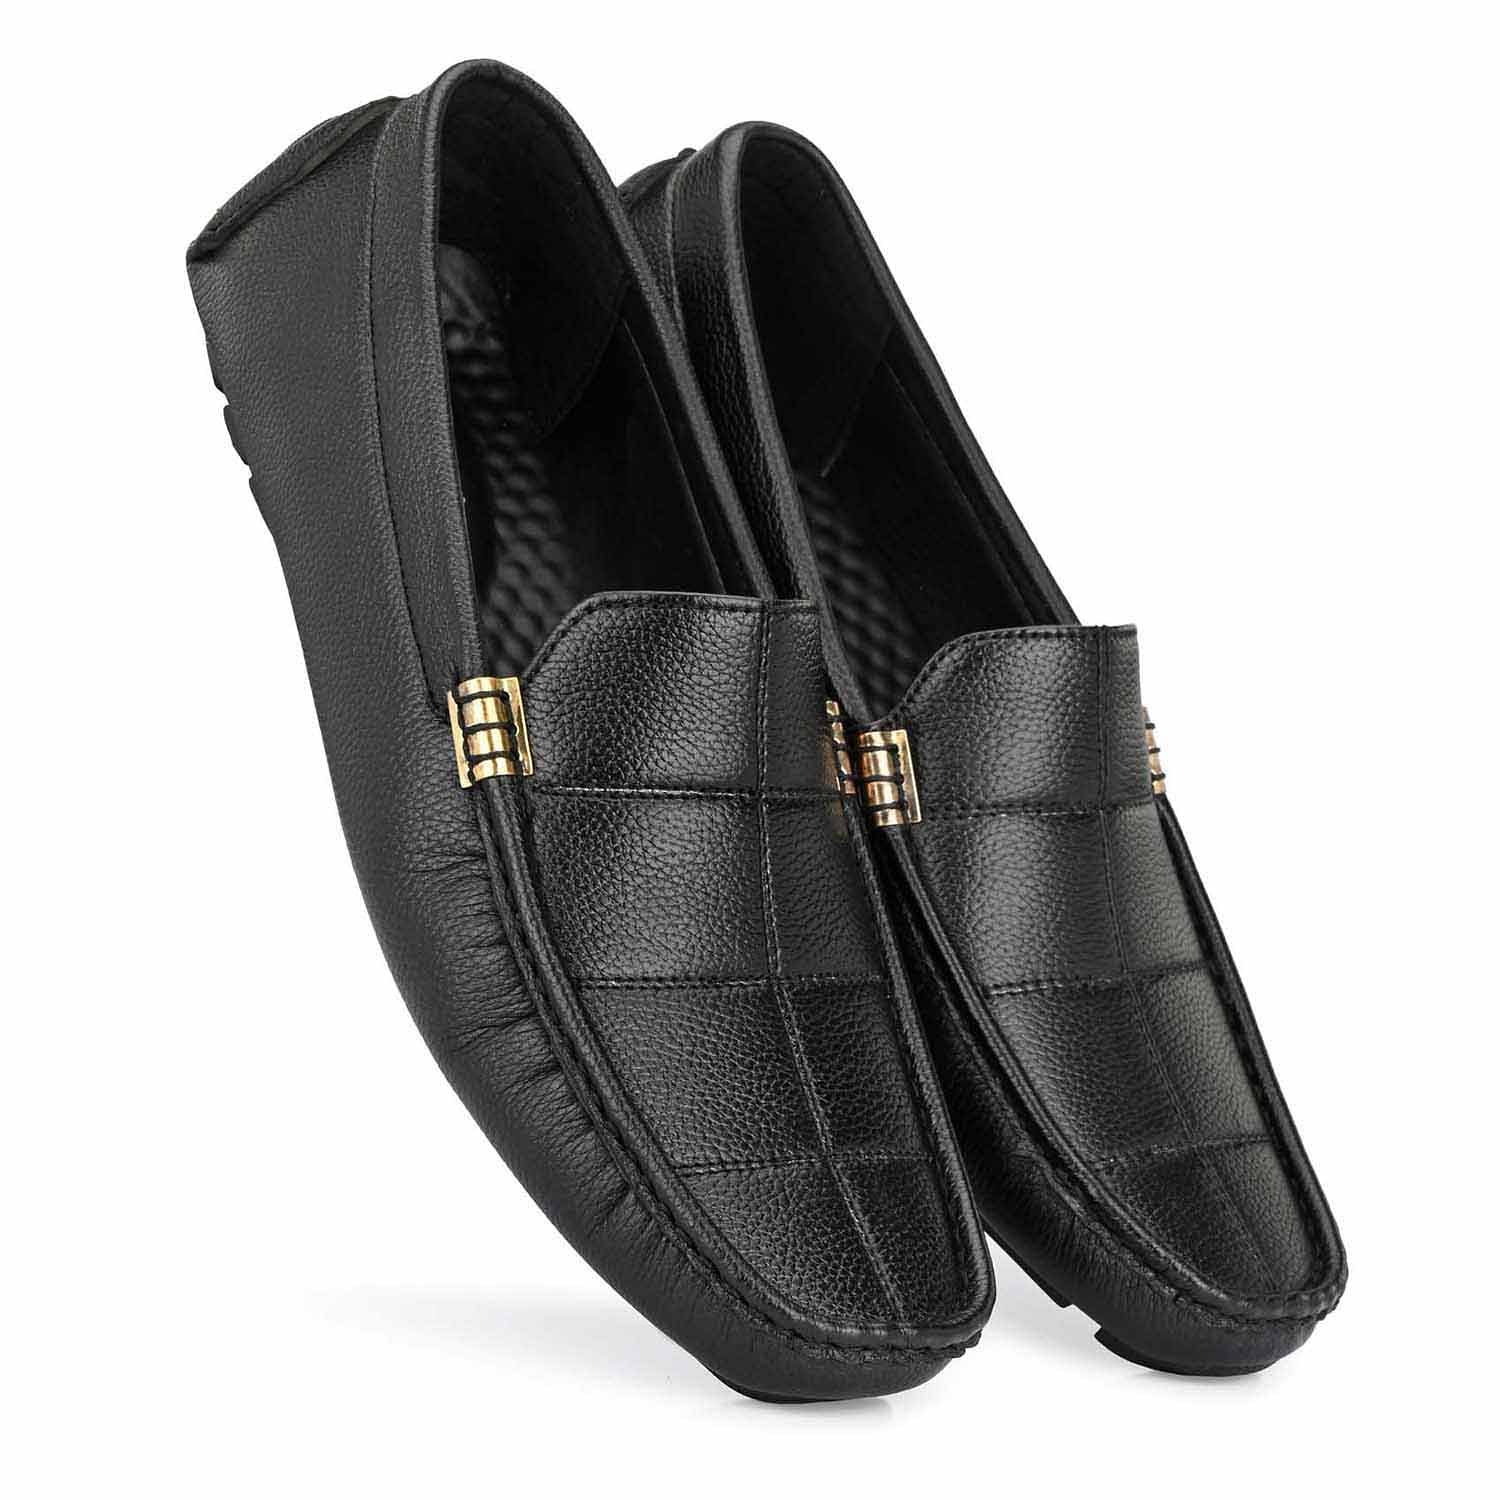 Pair-it Men's Loafers Shoes - Black-LZ-Loafer111